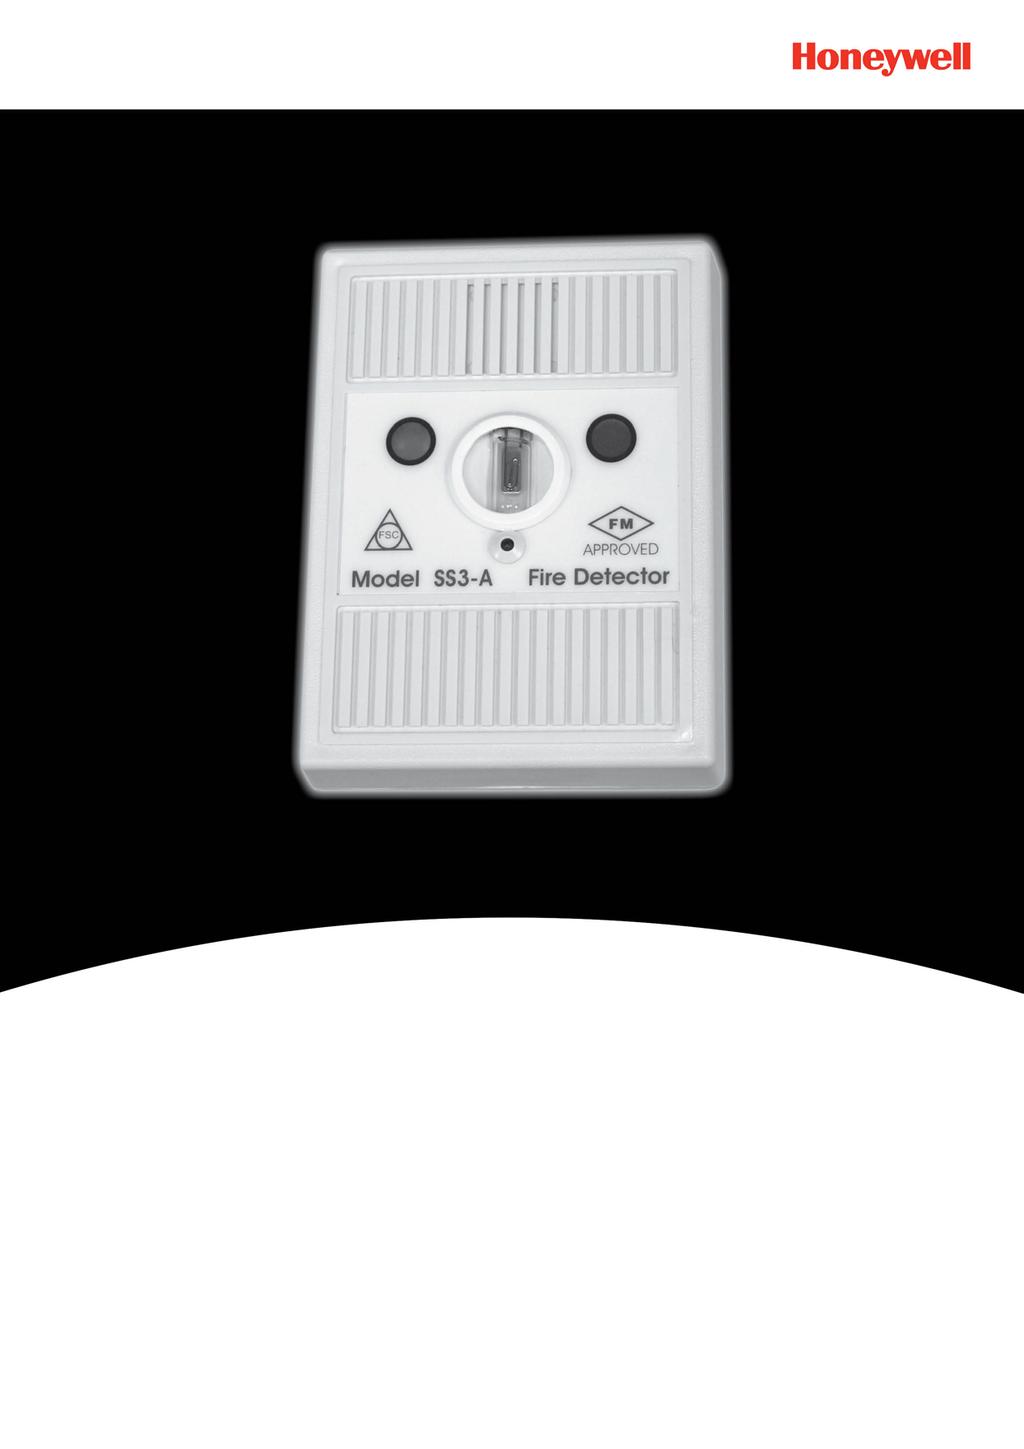 Fire Sentry Model SS3 Multi-Spectrum Digital Electro-Optical Fire Detectors (Models SS3-A, SS3-AN, SS3-AB, and SS3-ABN)